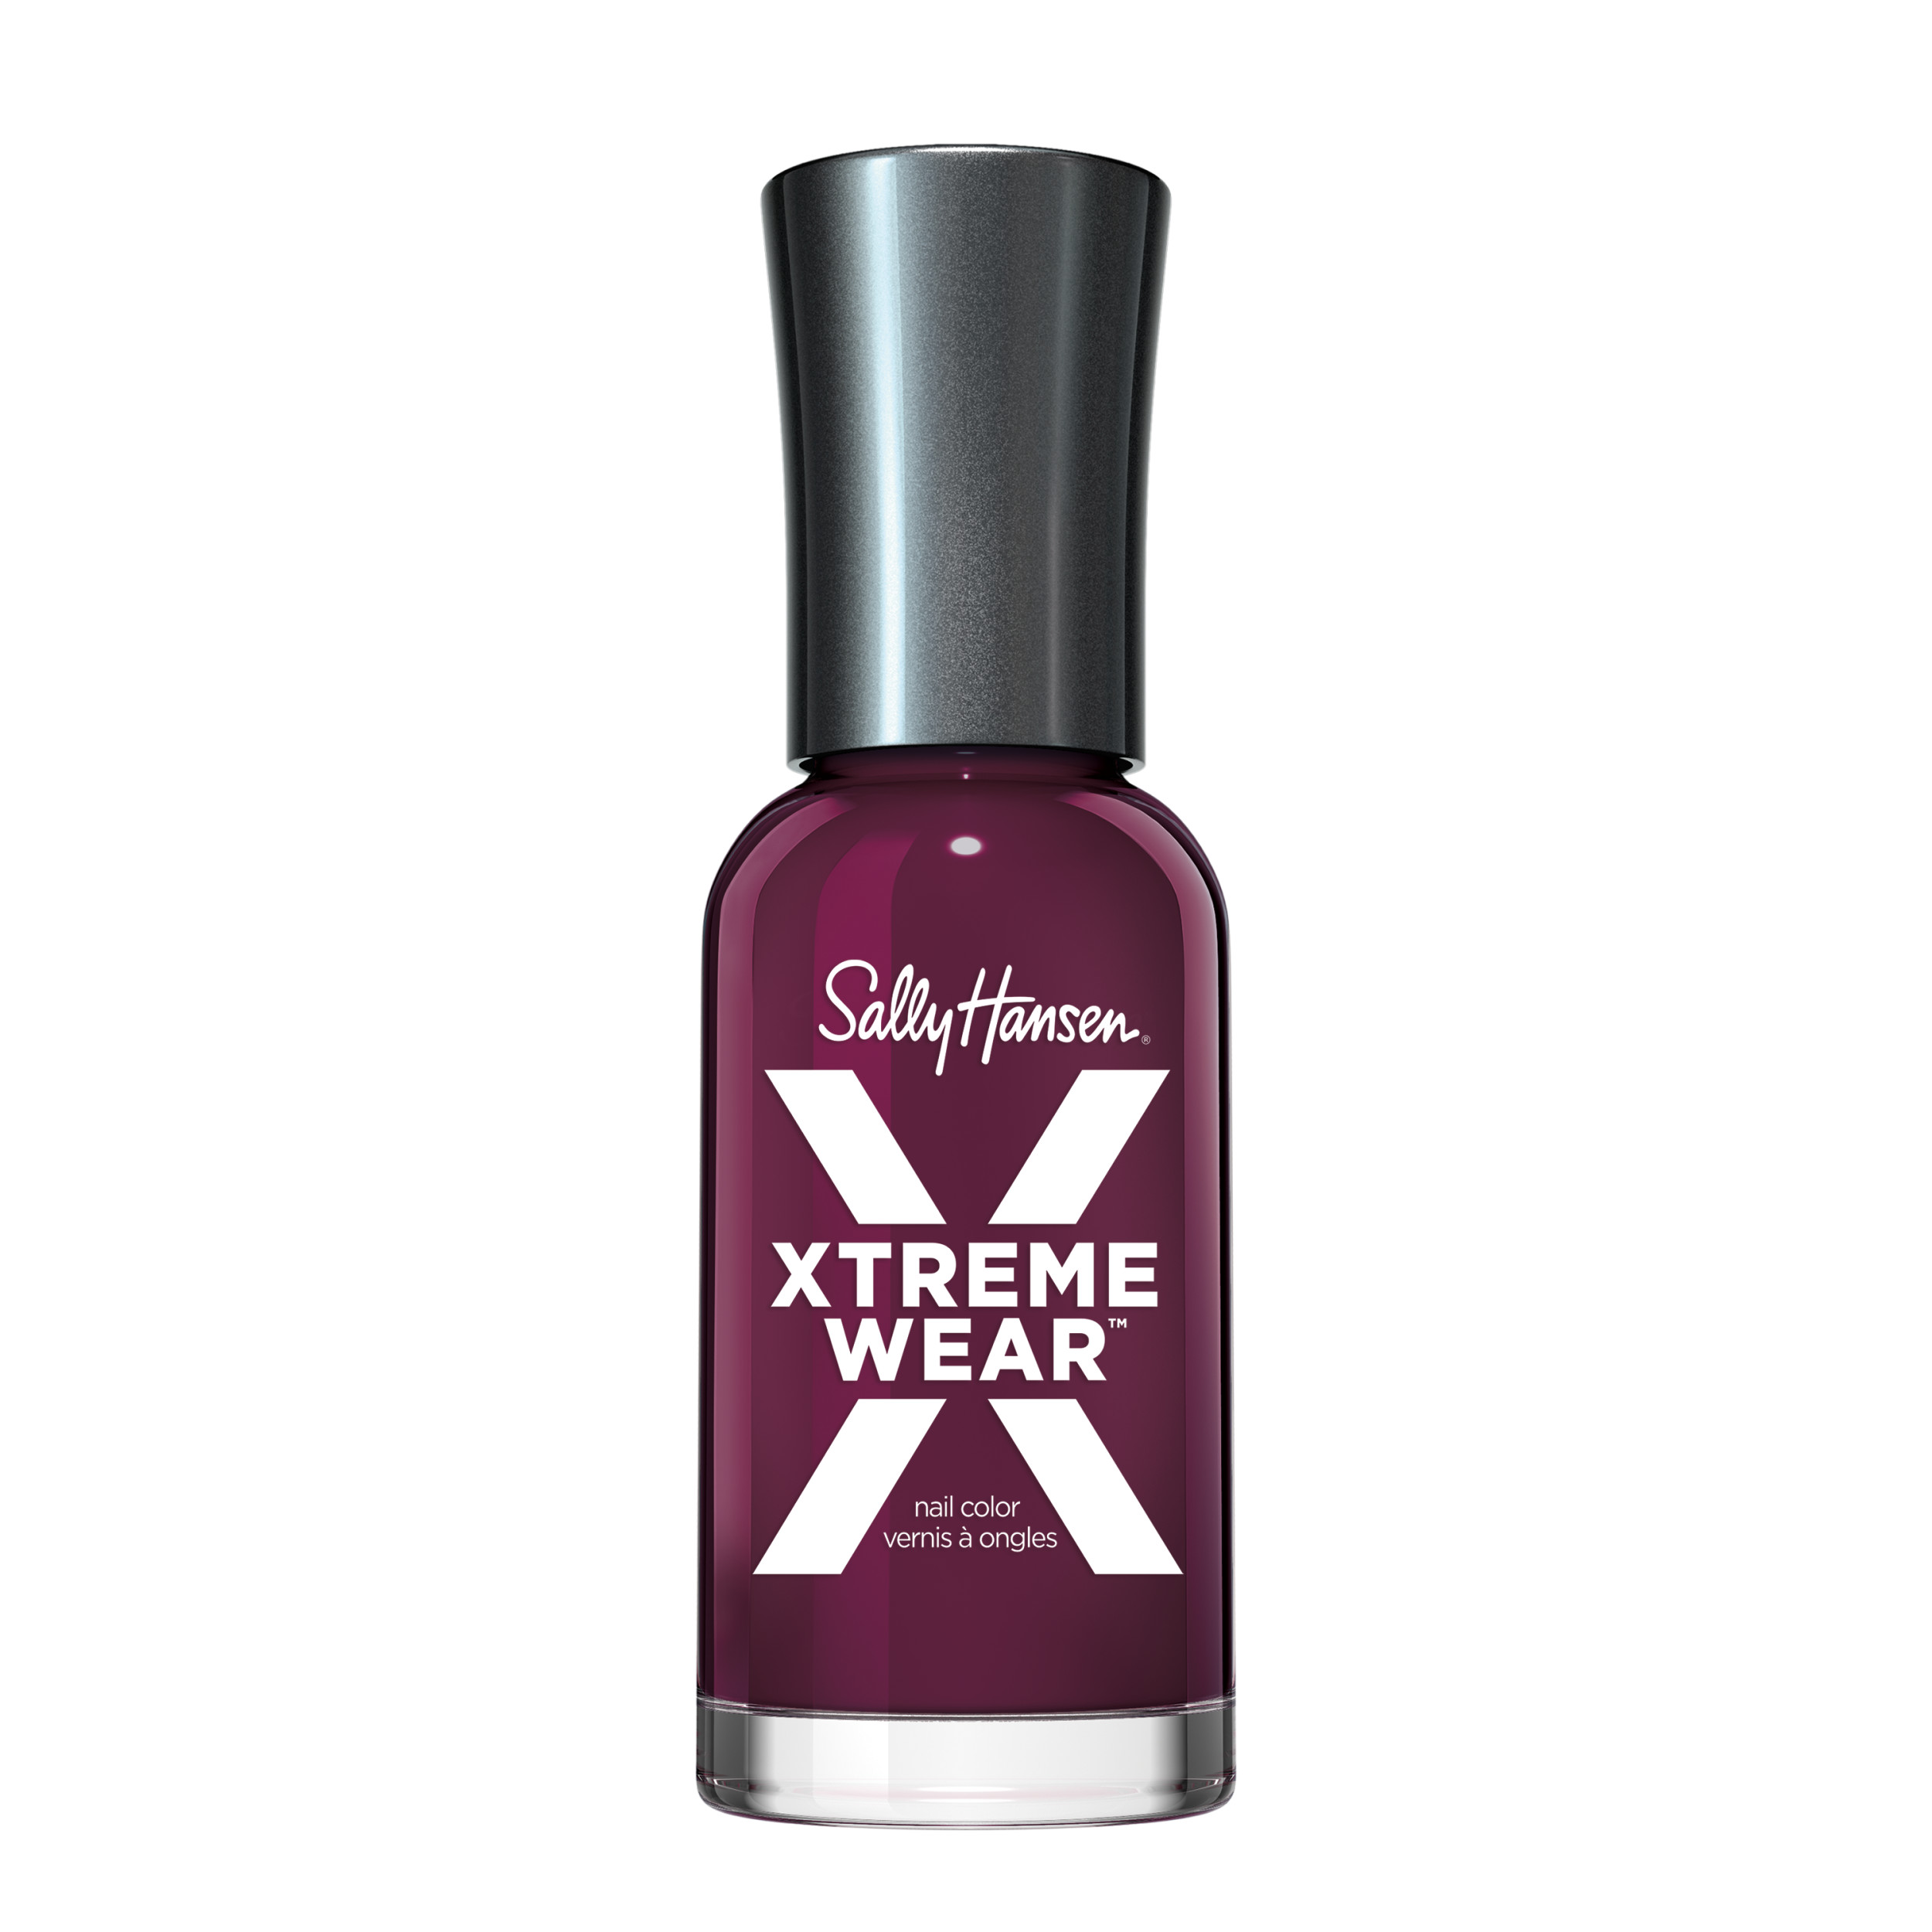 Sally Hansen Xtreme Wear Nail Polish, With The Beet, 0.4 oz, Chip Resistant, Bold Color - image 1 of 10